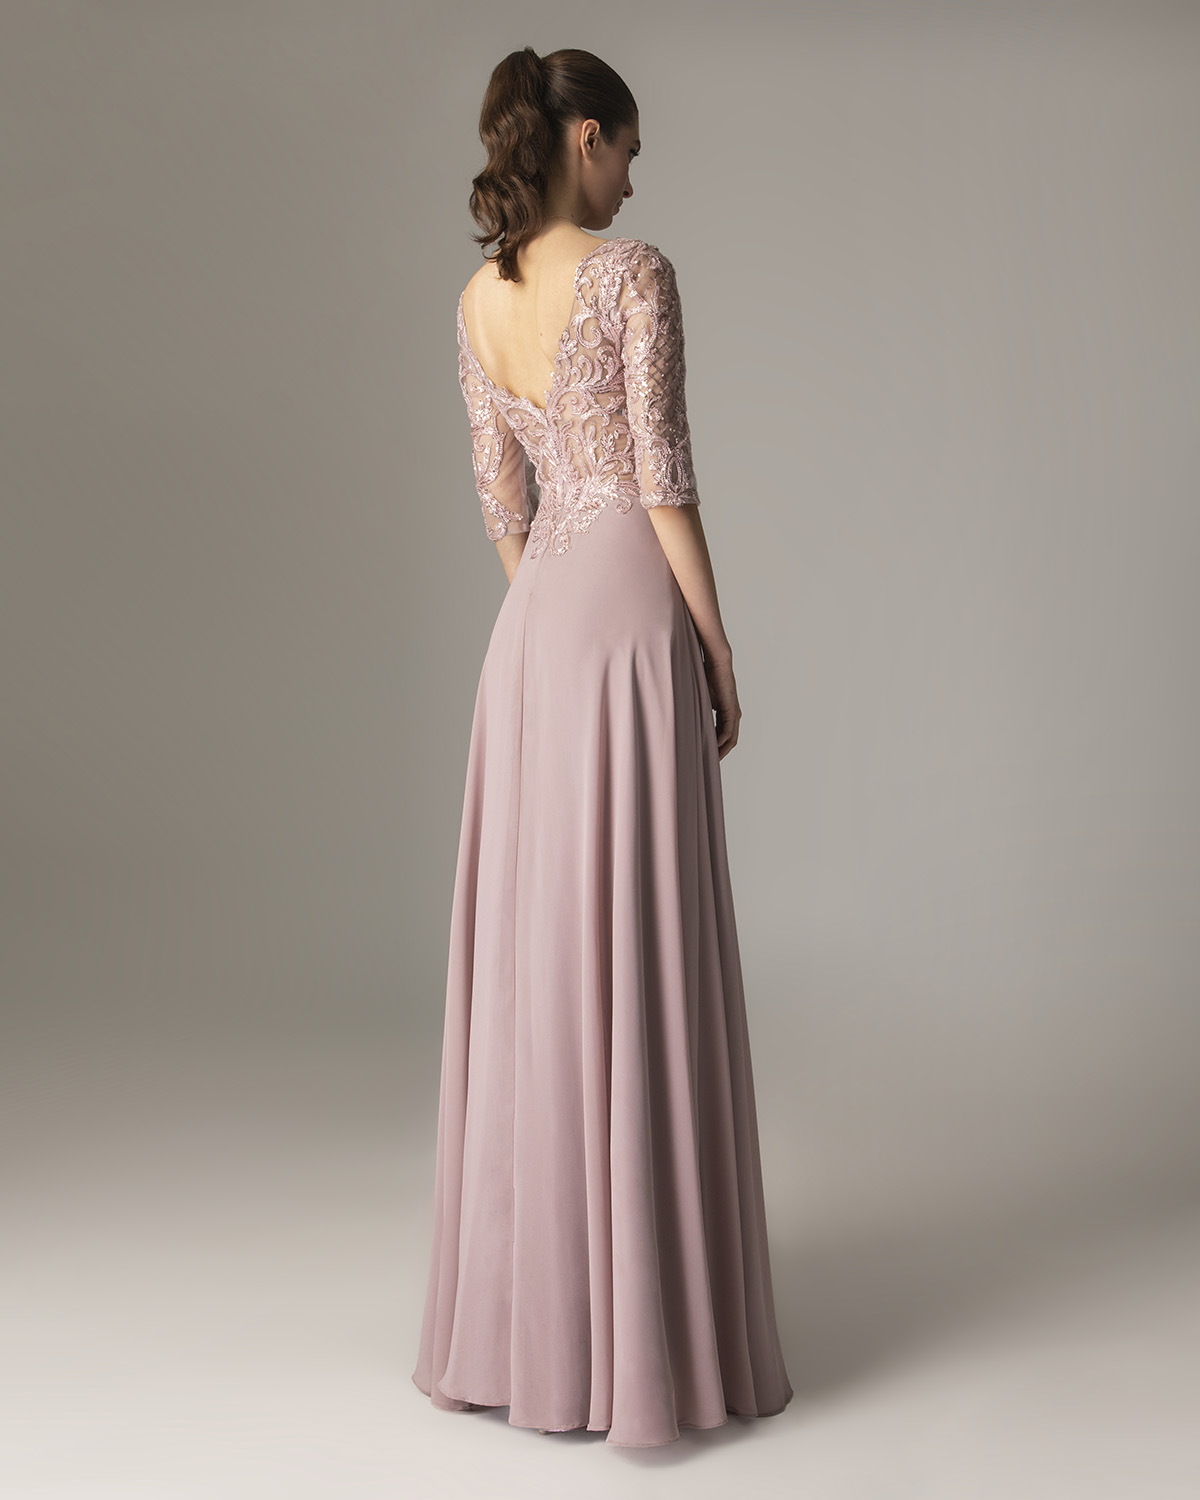 Classic Dresses / Long chiffon dress for the mother of the bride with fully beaded top and sleeves